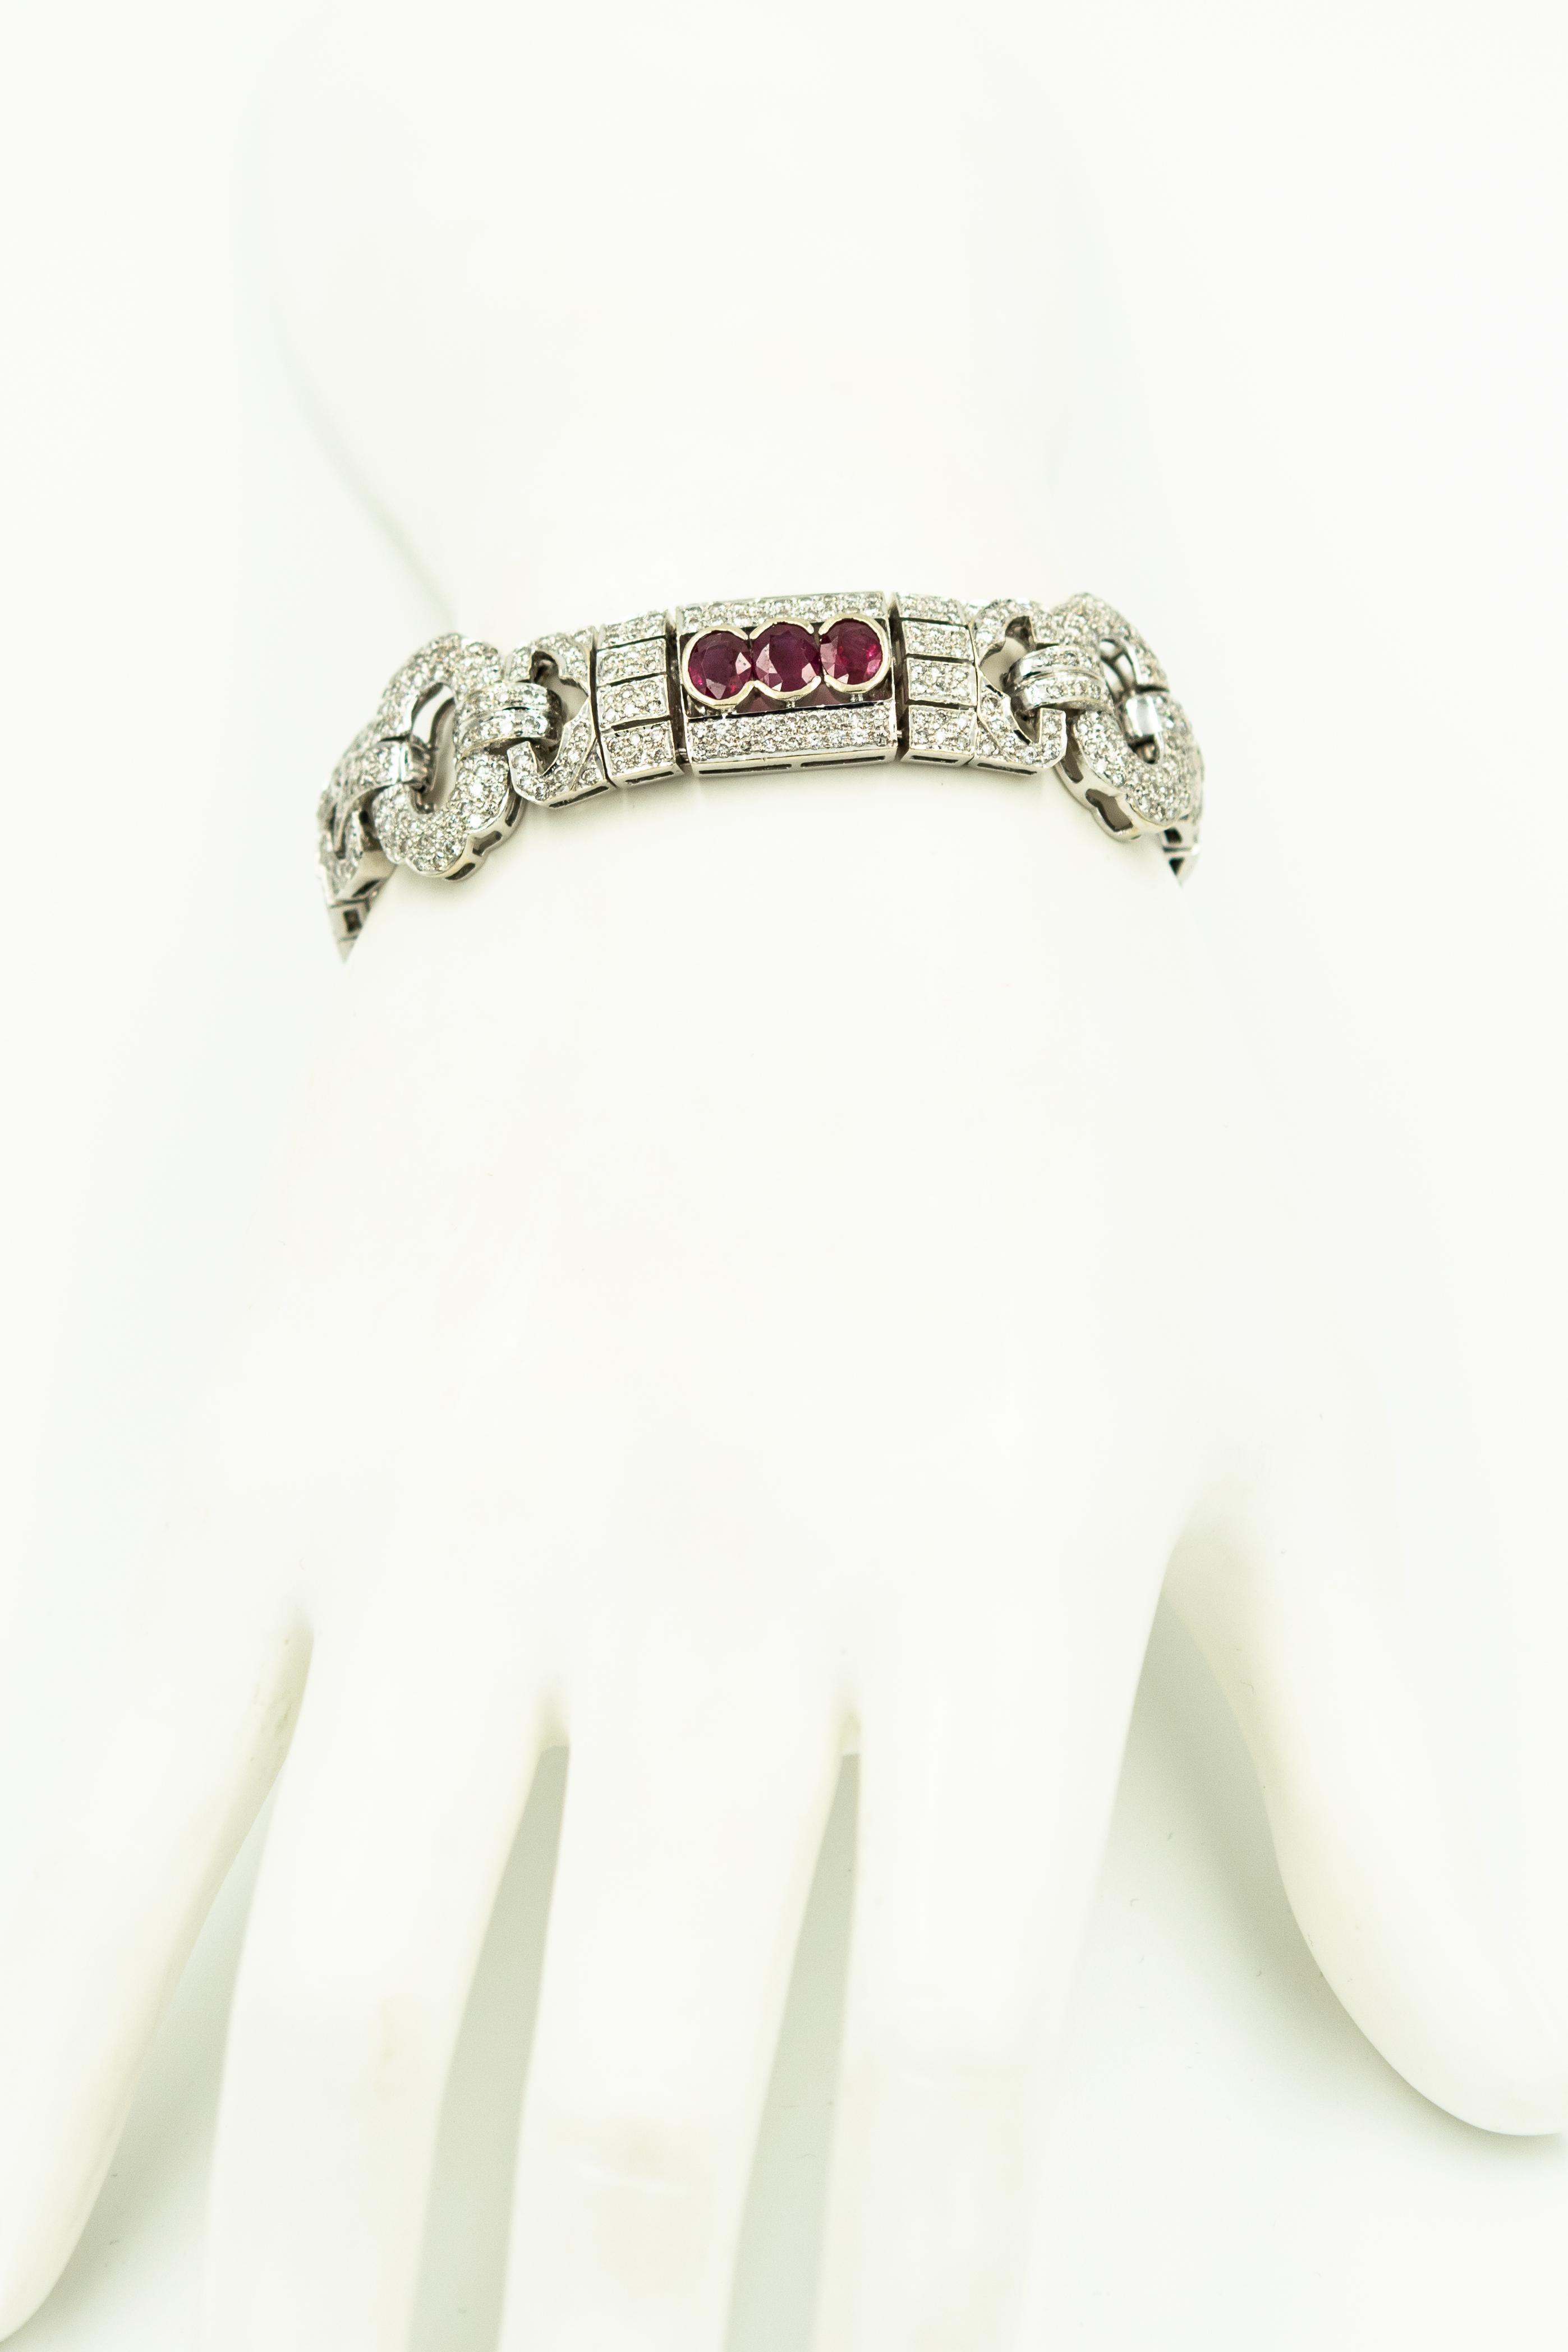 Women's Wide Art Deco Style Diamond and Ruby White Gold Bracelet For Sale